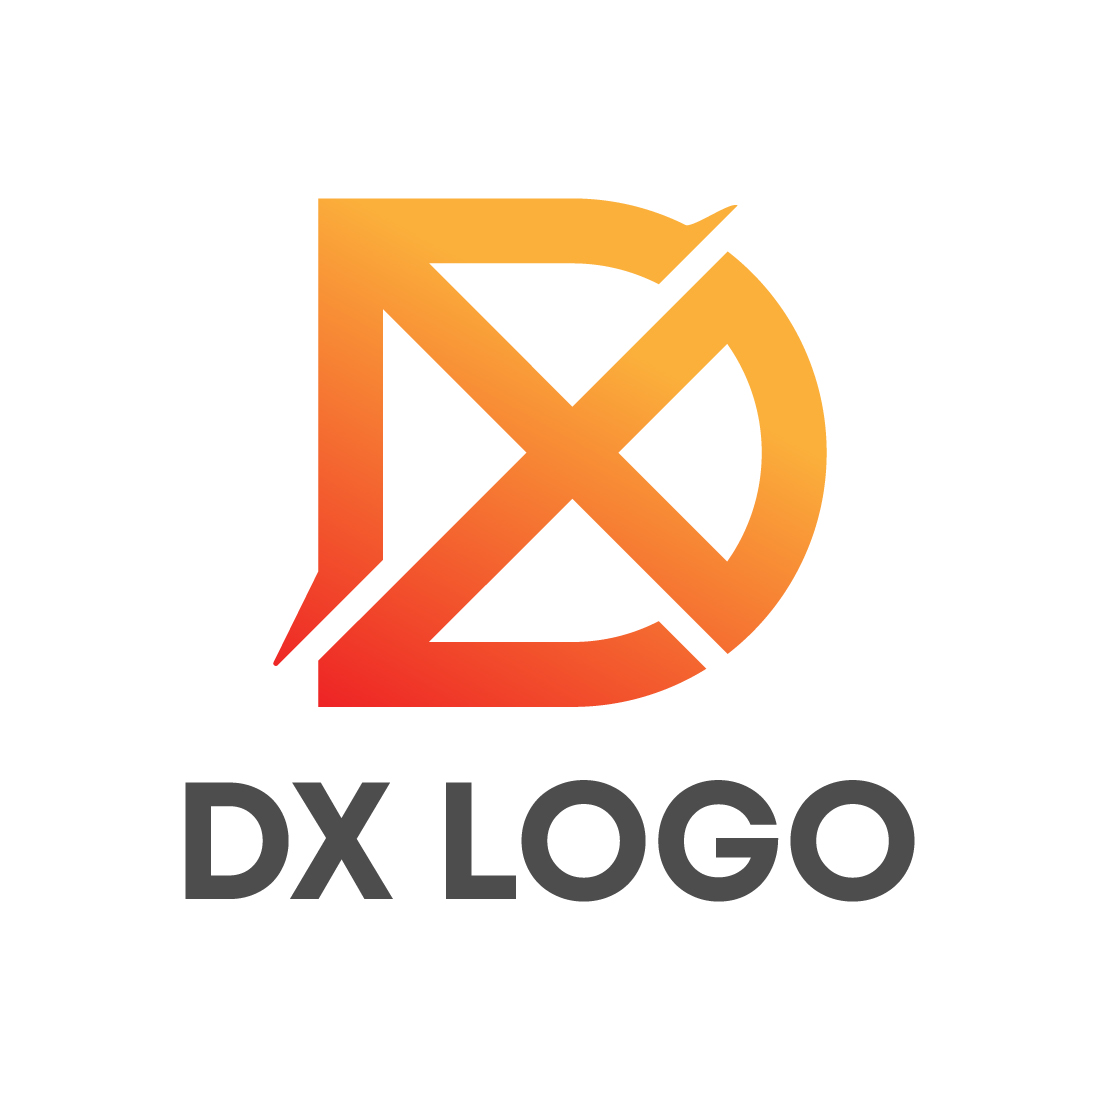 DX logo preview image.